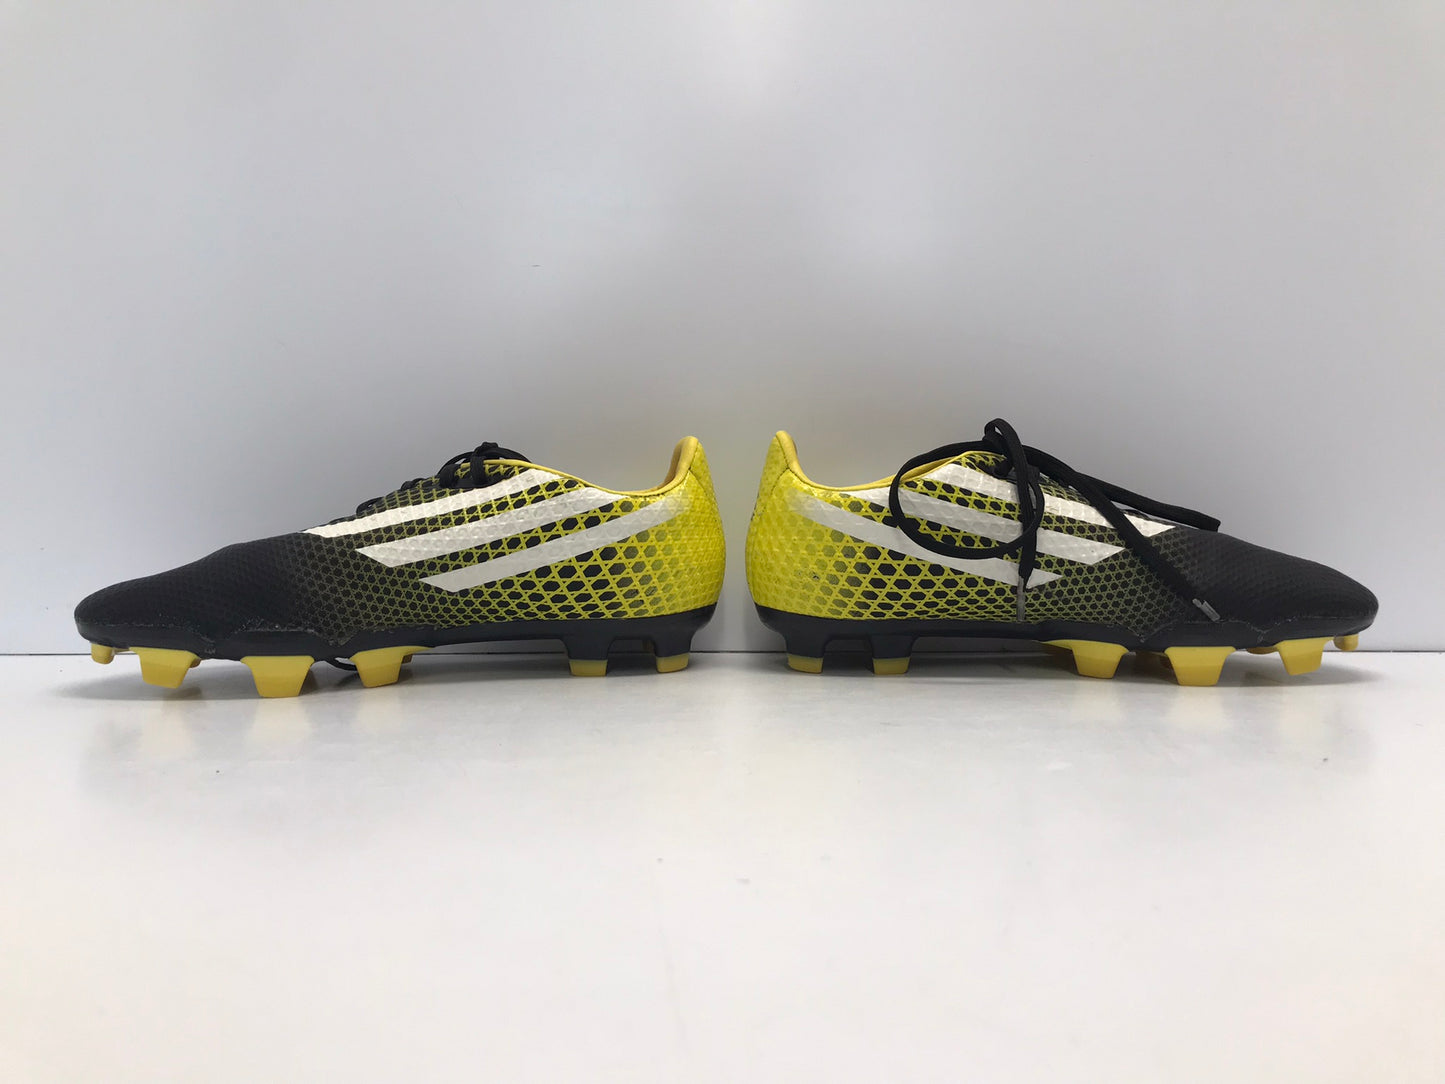 Soccer Shoes Cleats Cleats Men's Size 6.5 Adidas Black White Yellow Excellent